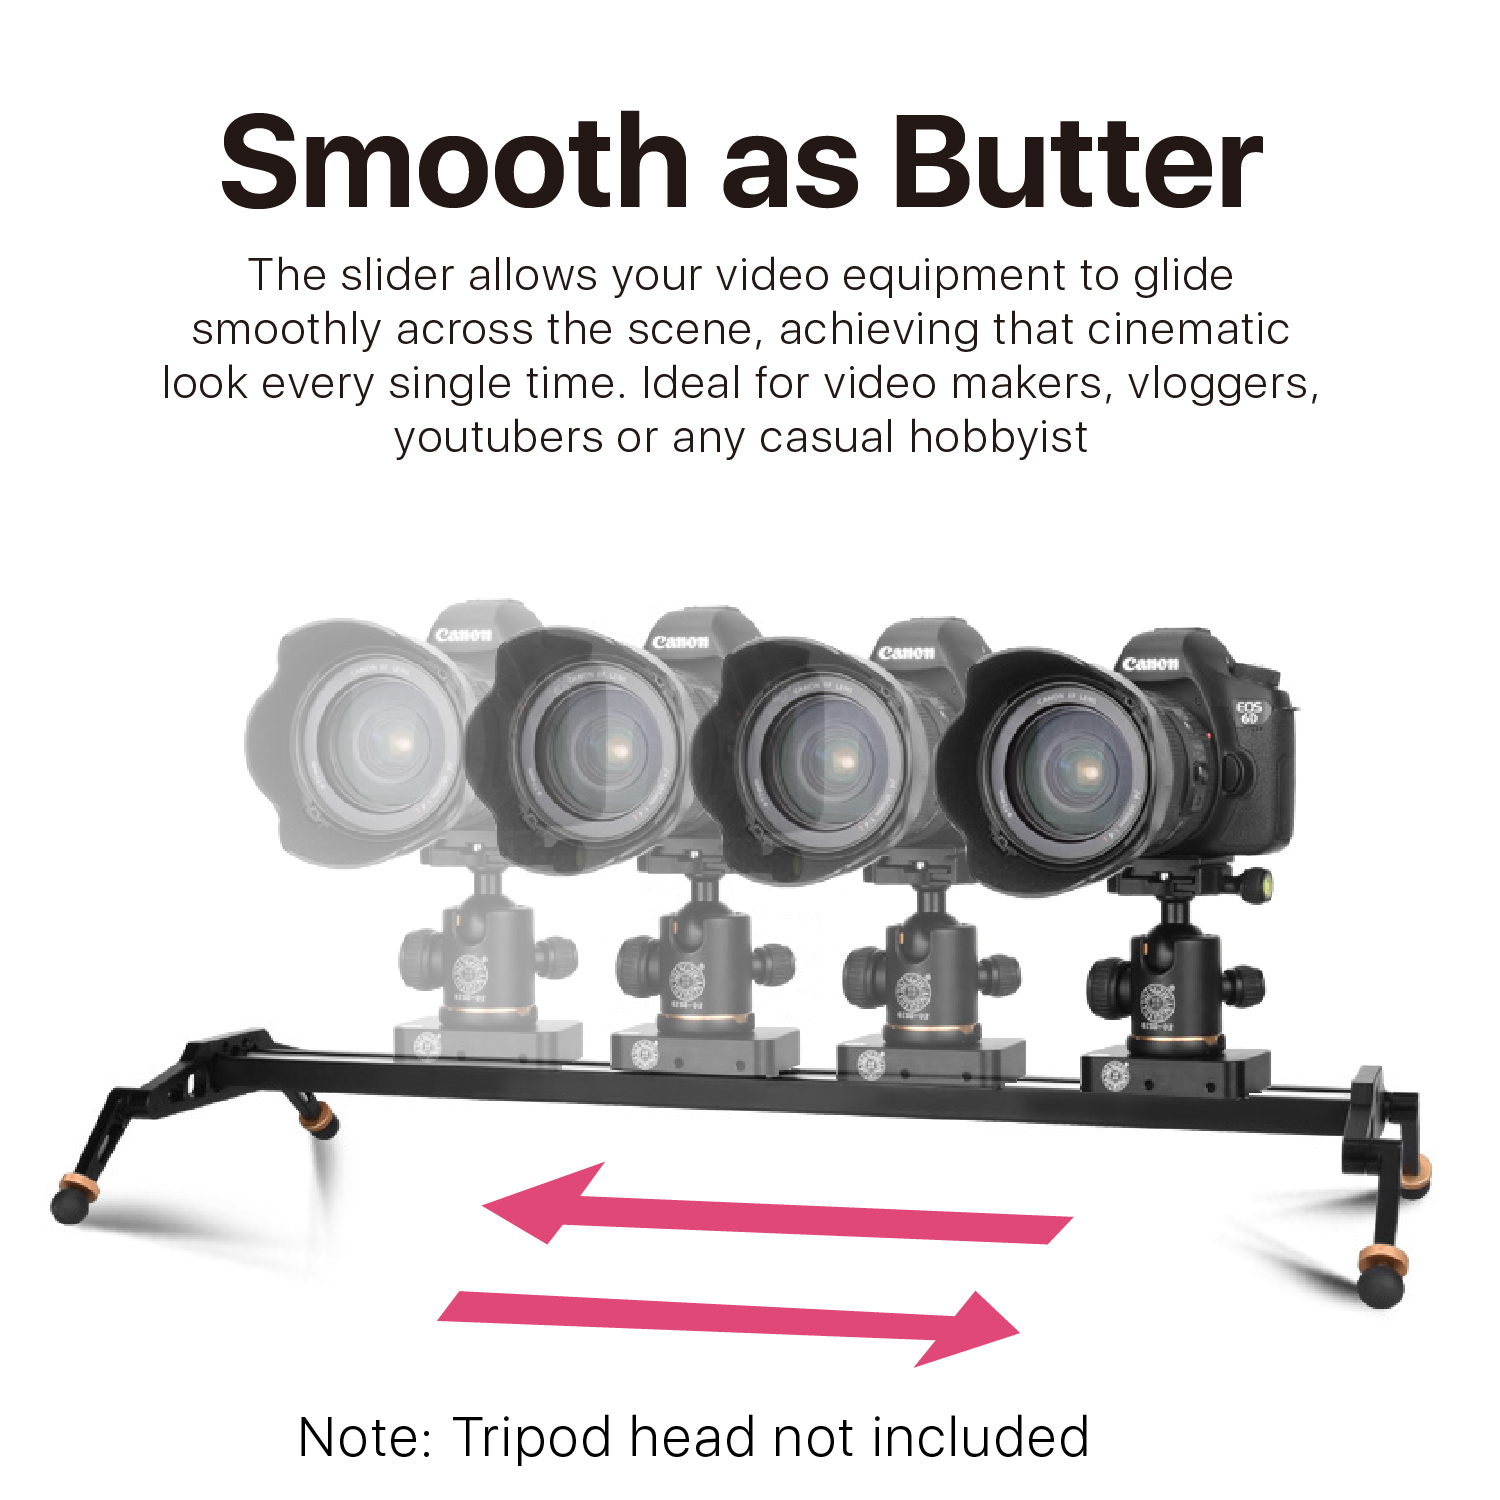 Portable camera slider. Easy to carry and use, set up in minutes